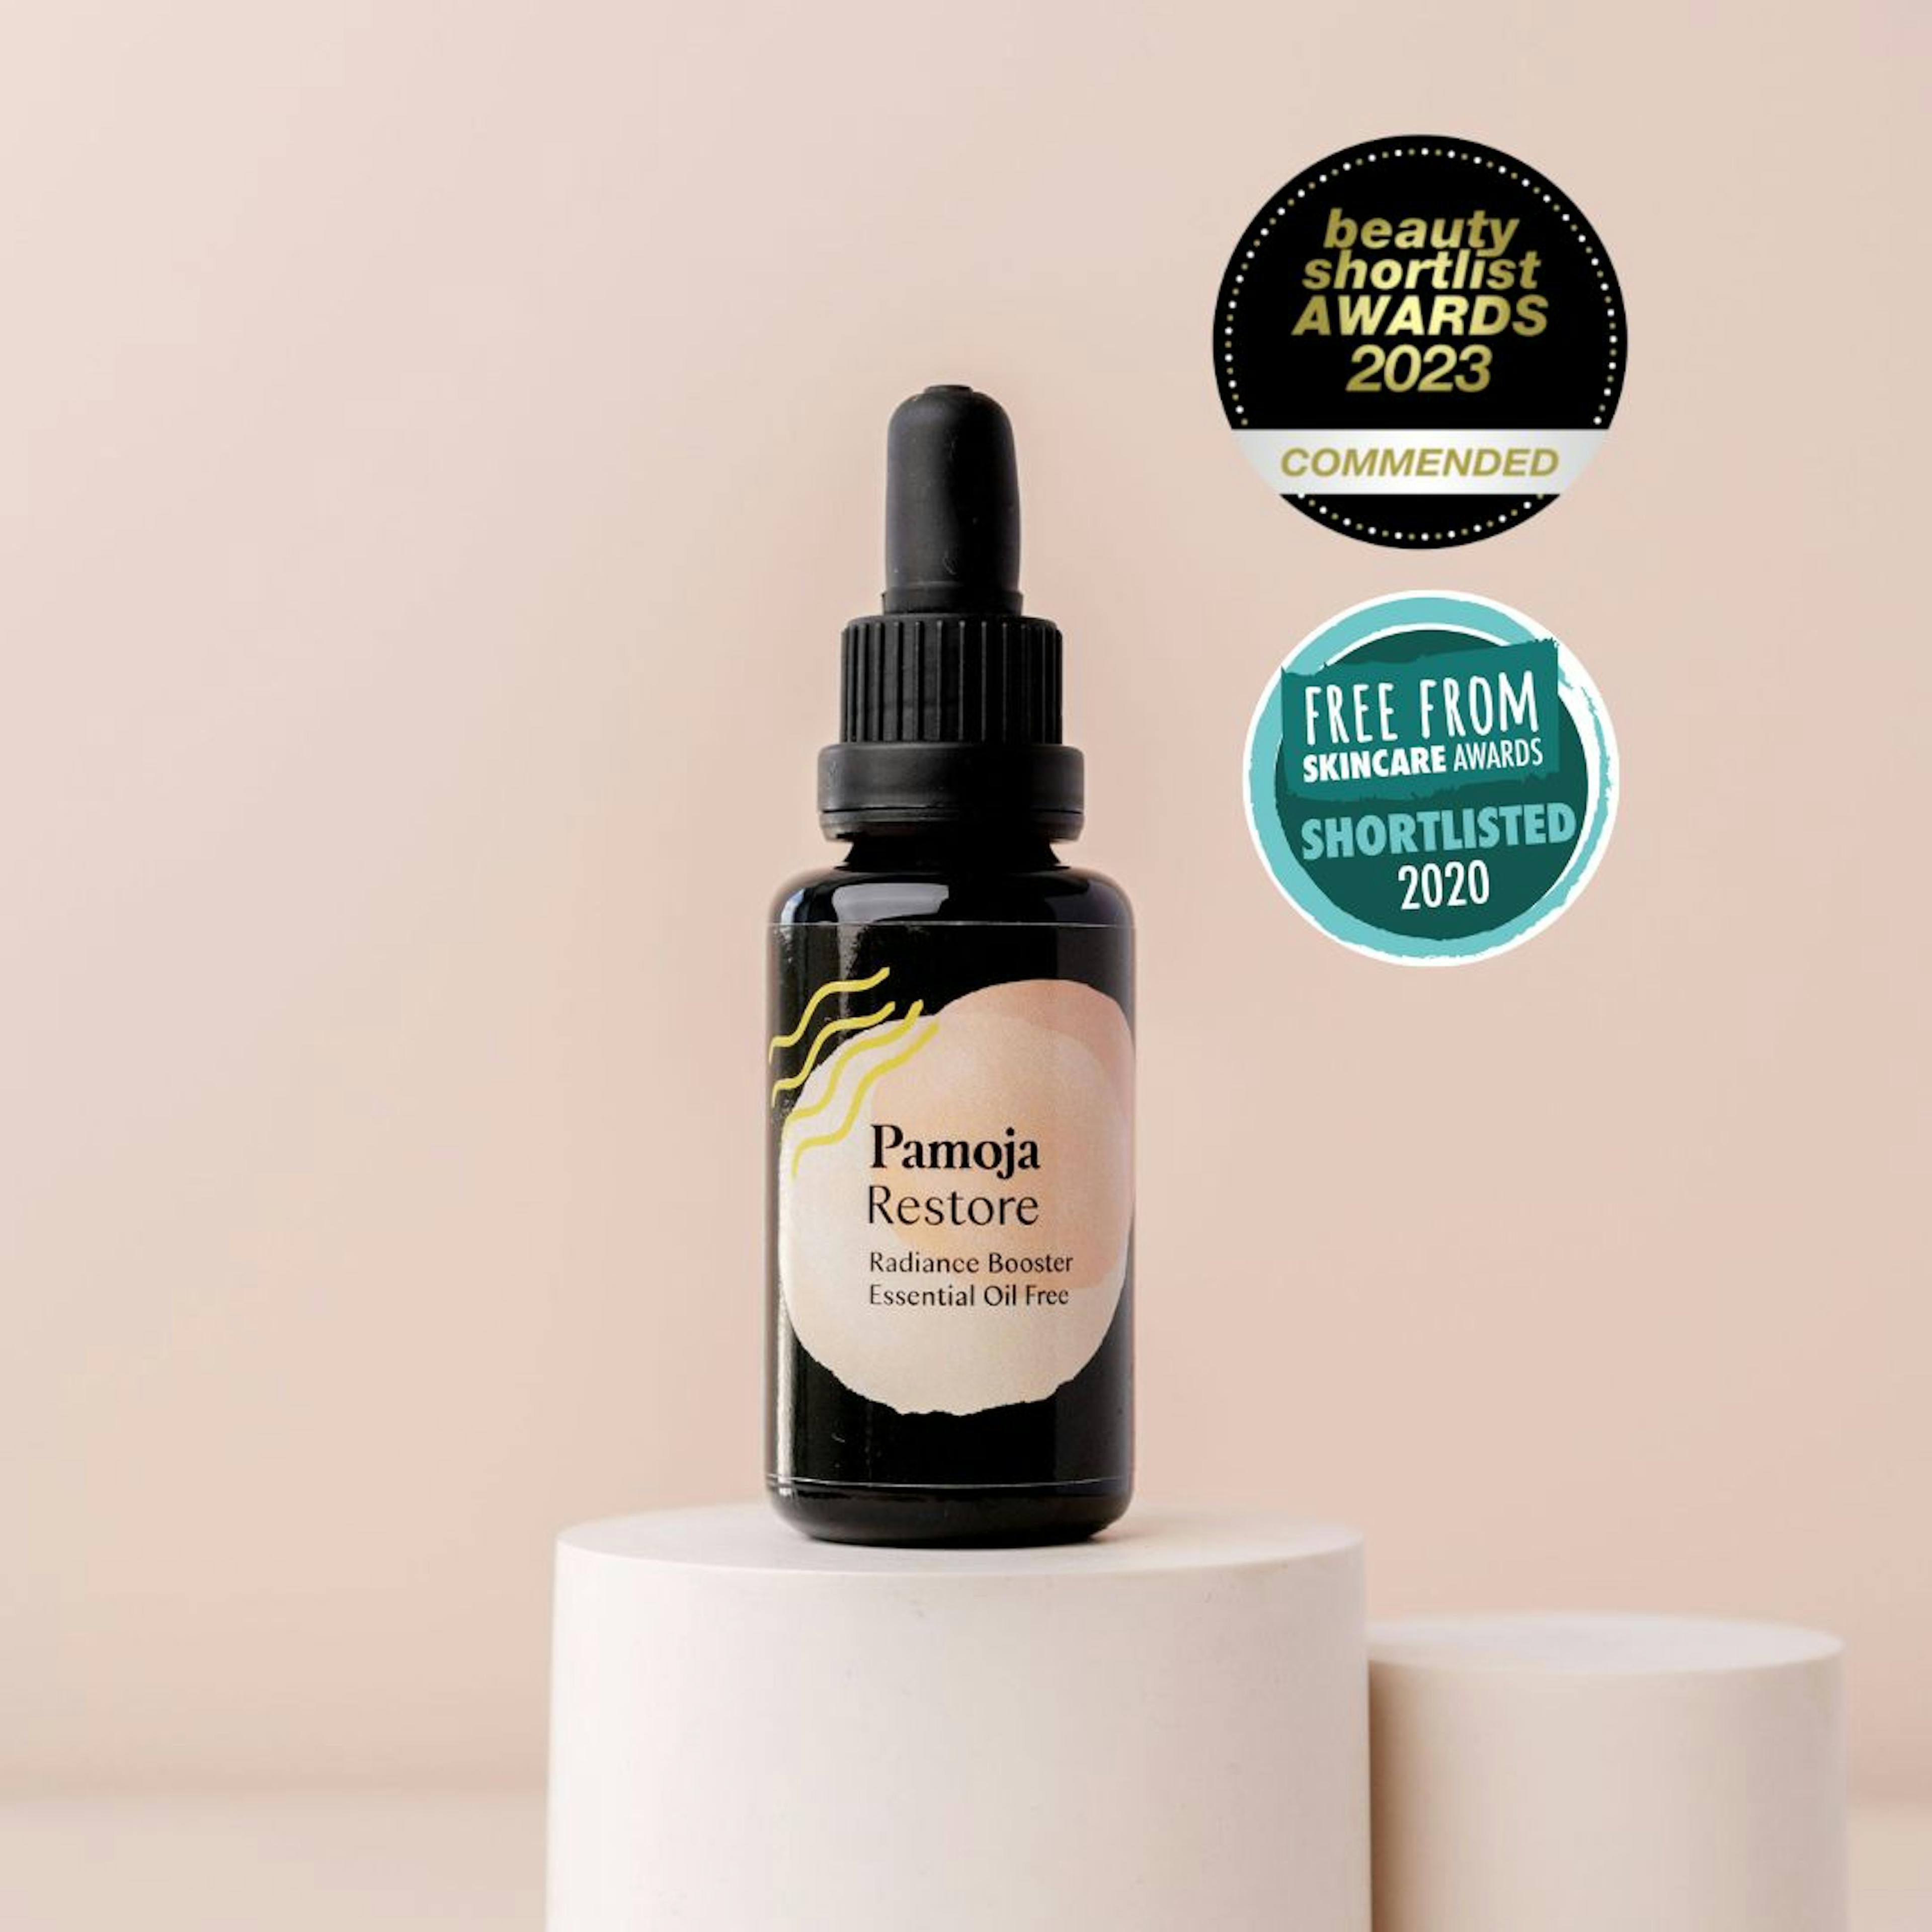 100% Natural Restore Radiance Booster Essential Oil Free | Multi-Purpose Beauty Oil |30ml